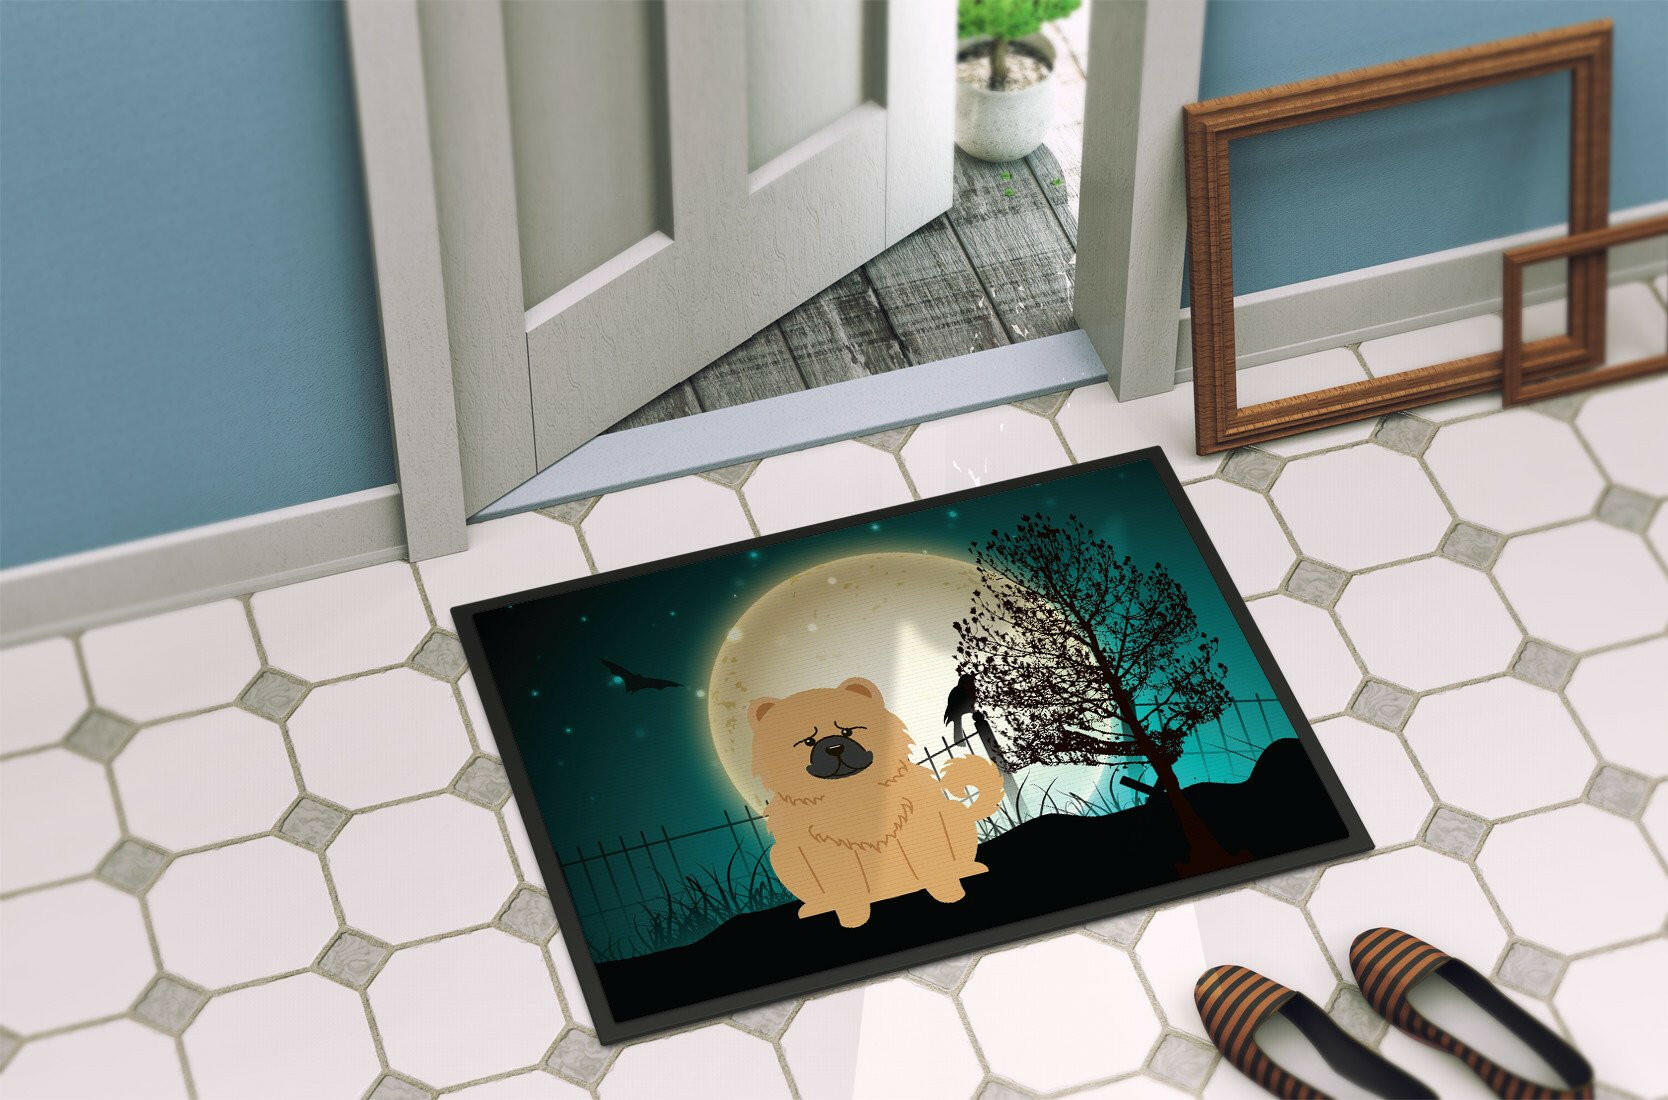 Halloween Scary Chow Chow Cream Indoor or Outdoor Mat 24x36 BB2334JMAT - the-store.com